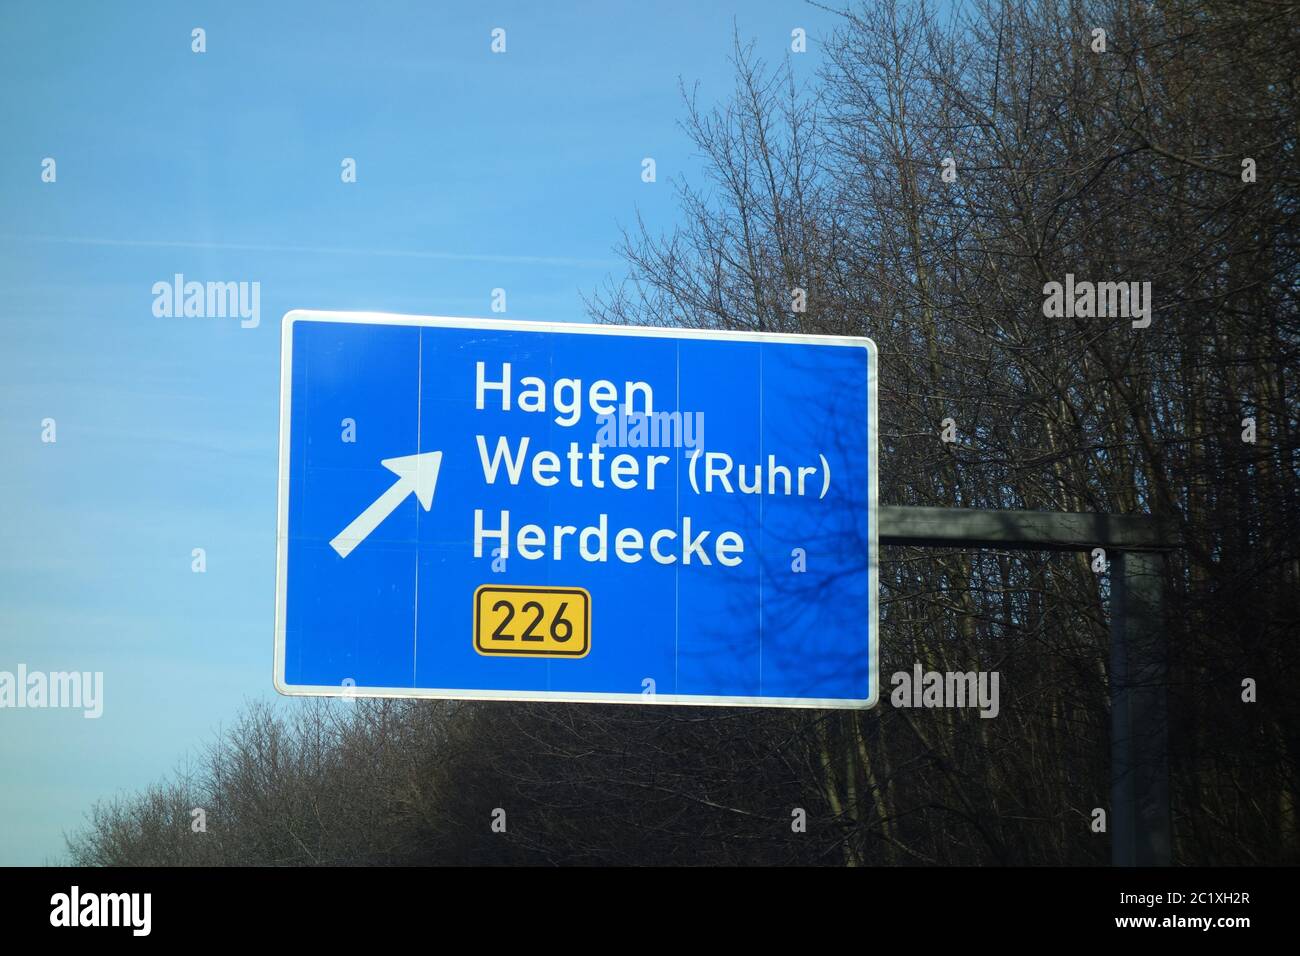 Hagen City High Resolution Stock Photography and Images - Alamy